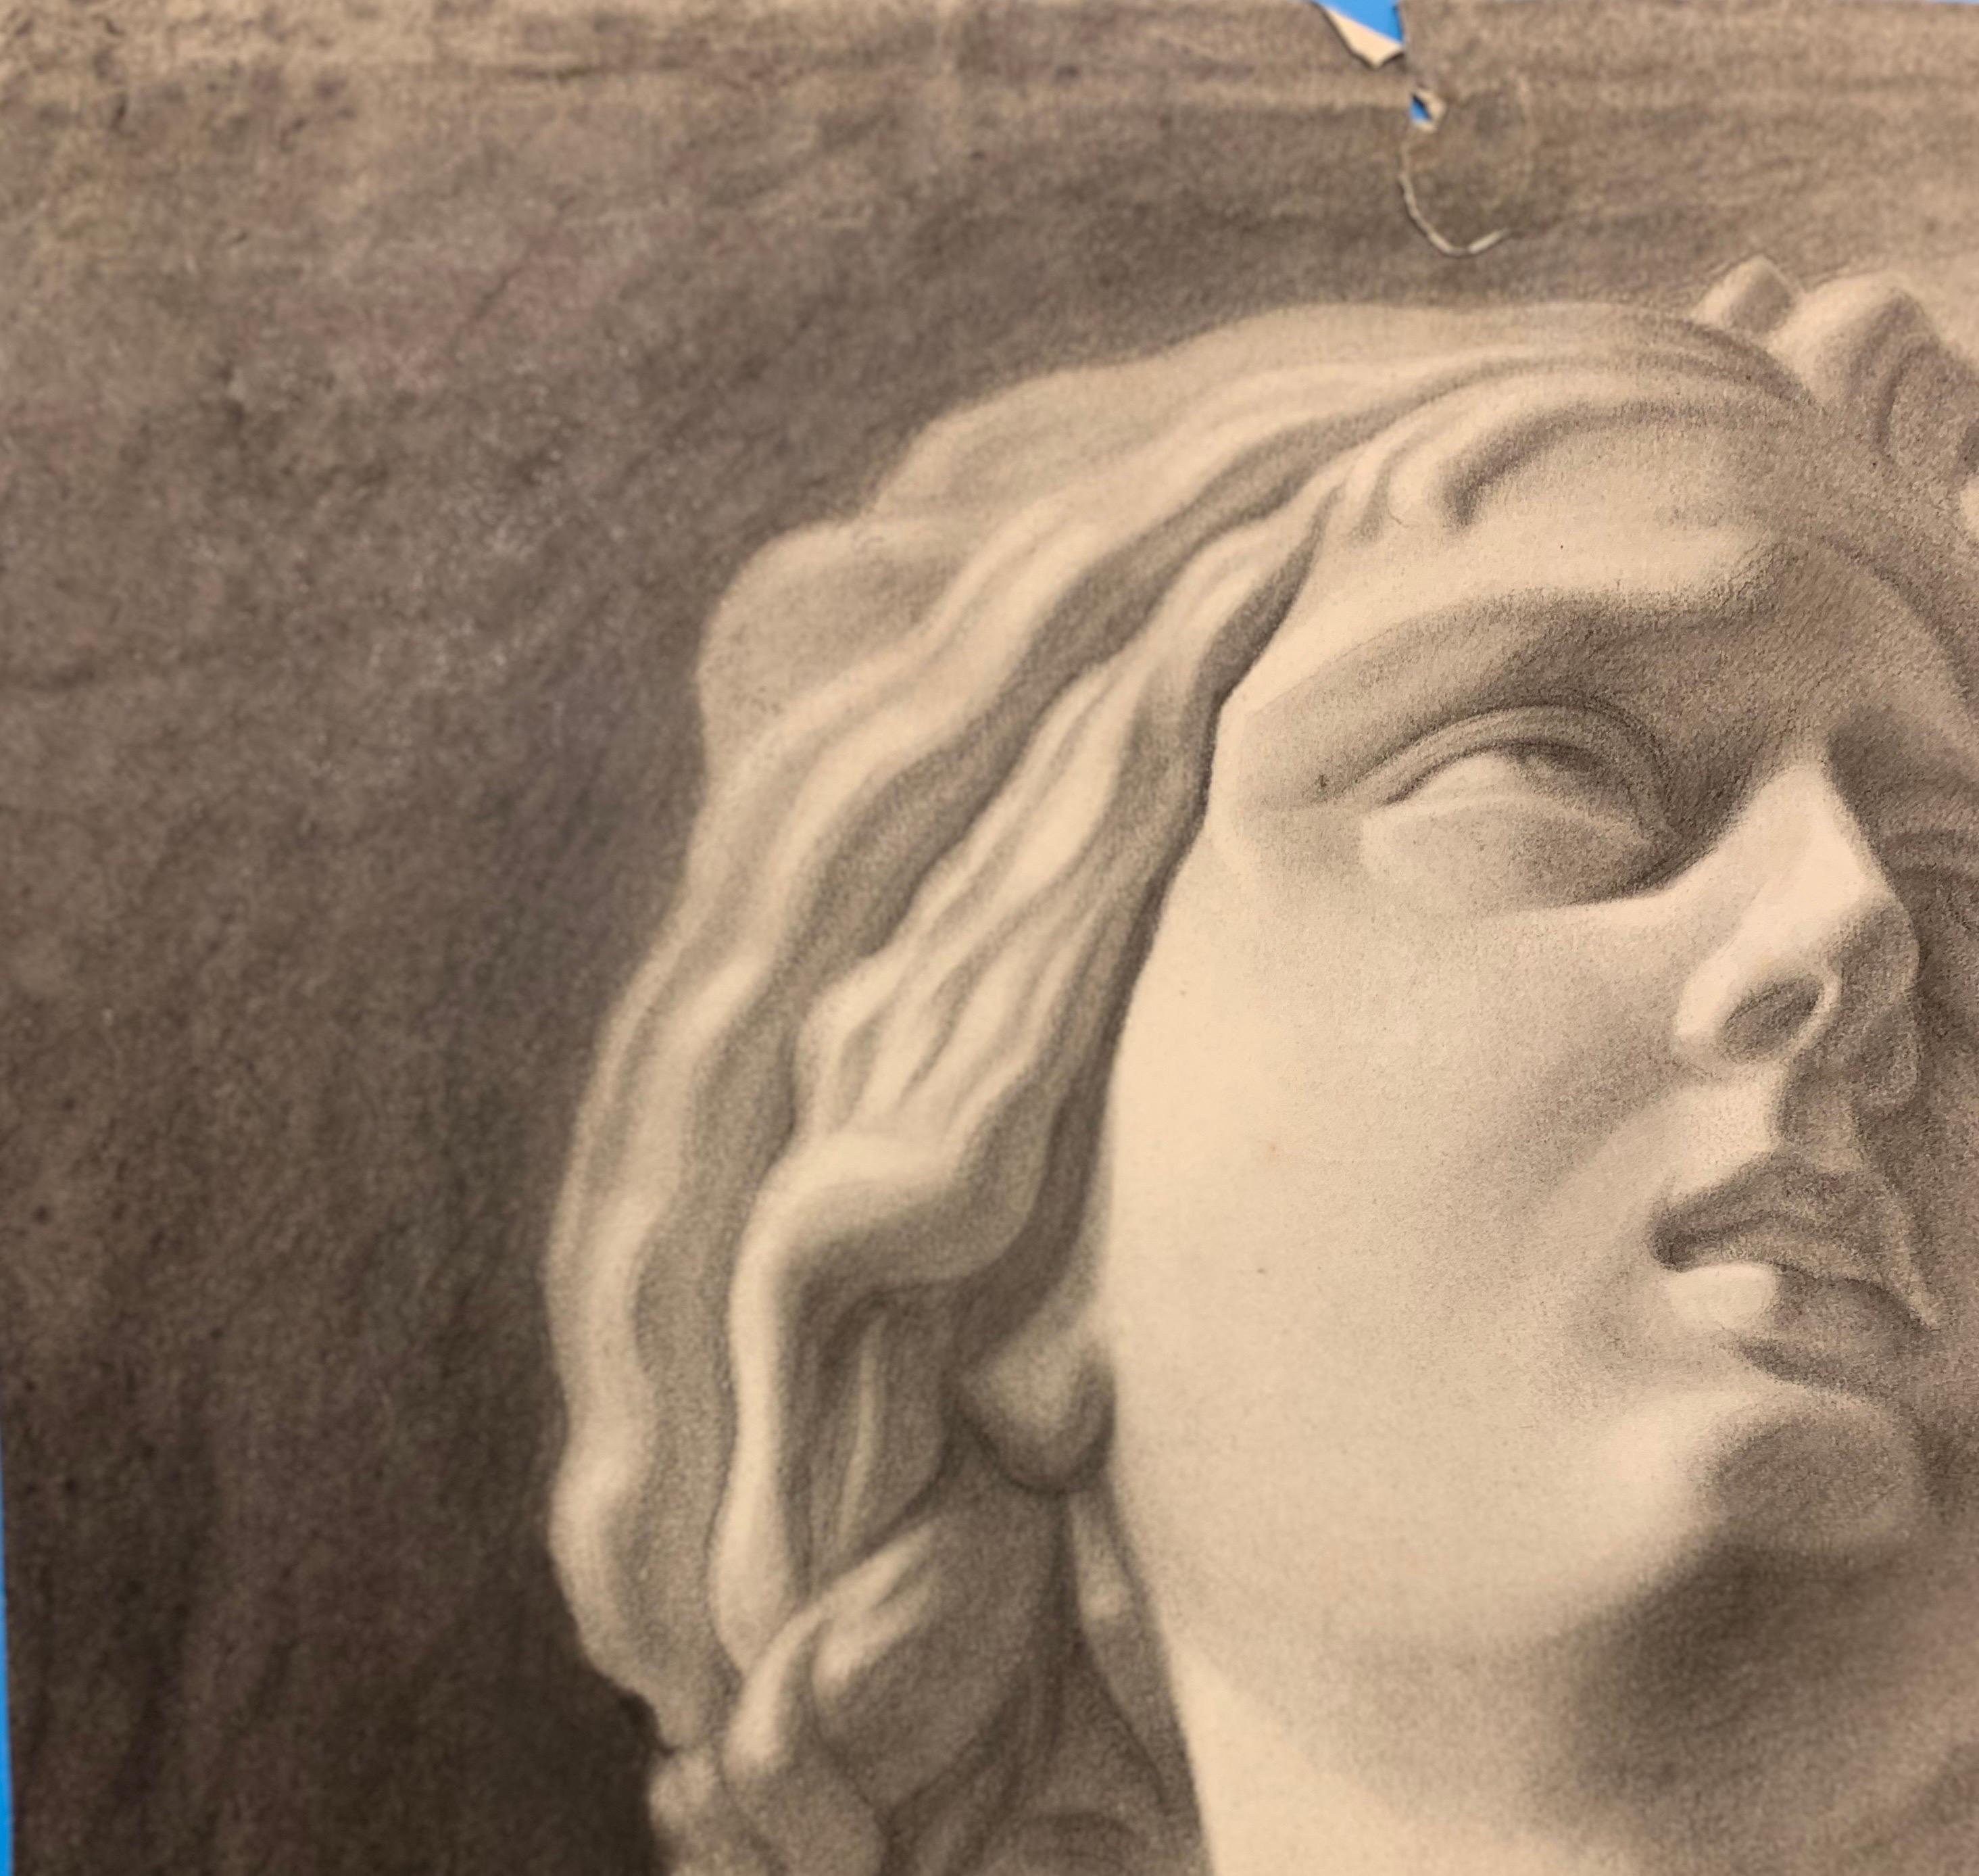 This 19th century Italian drawing of classical bust sculpture in plaster showcases expert chiaroscuro modeling in black and brown charcoal on paper.

Technique: black and brown charcoal on thick matte rough paper. 

Dimensions: 60.5cm x 44.5cm

This